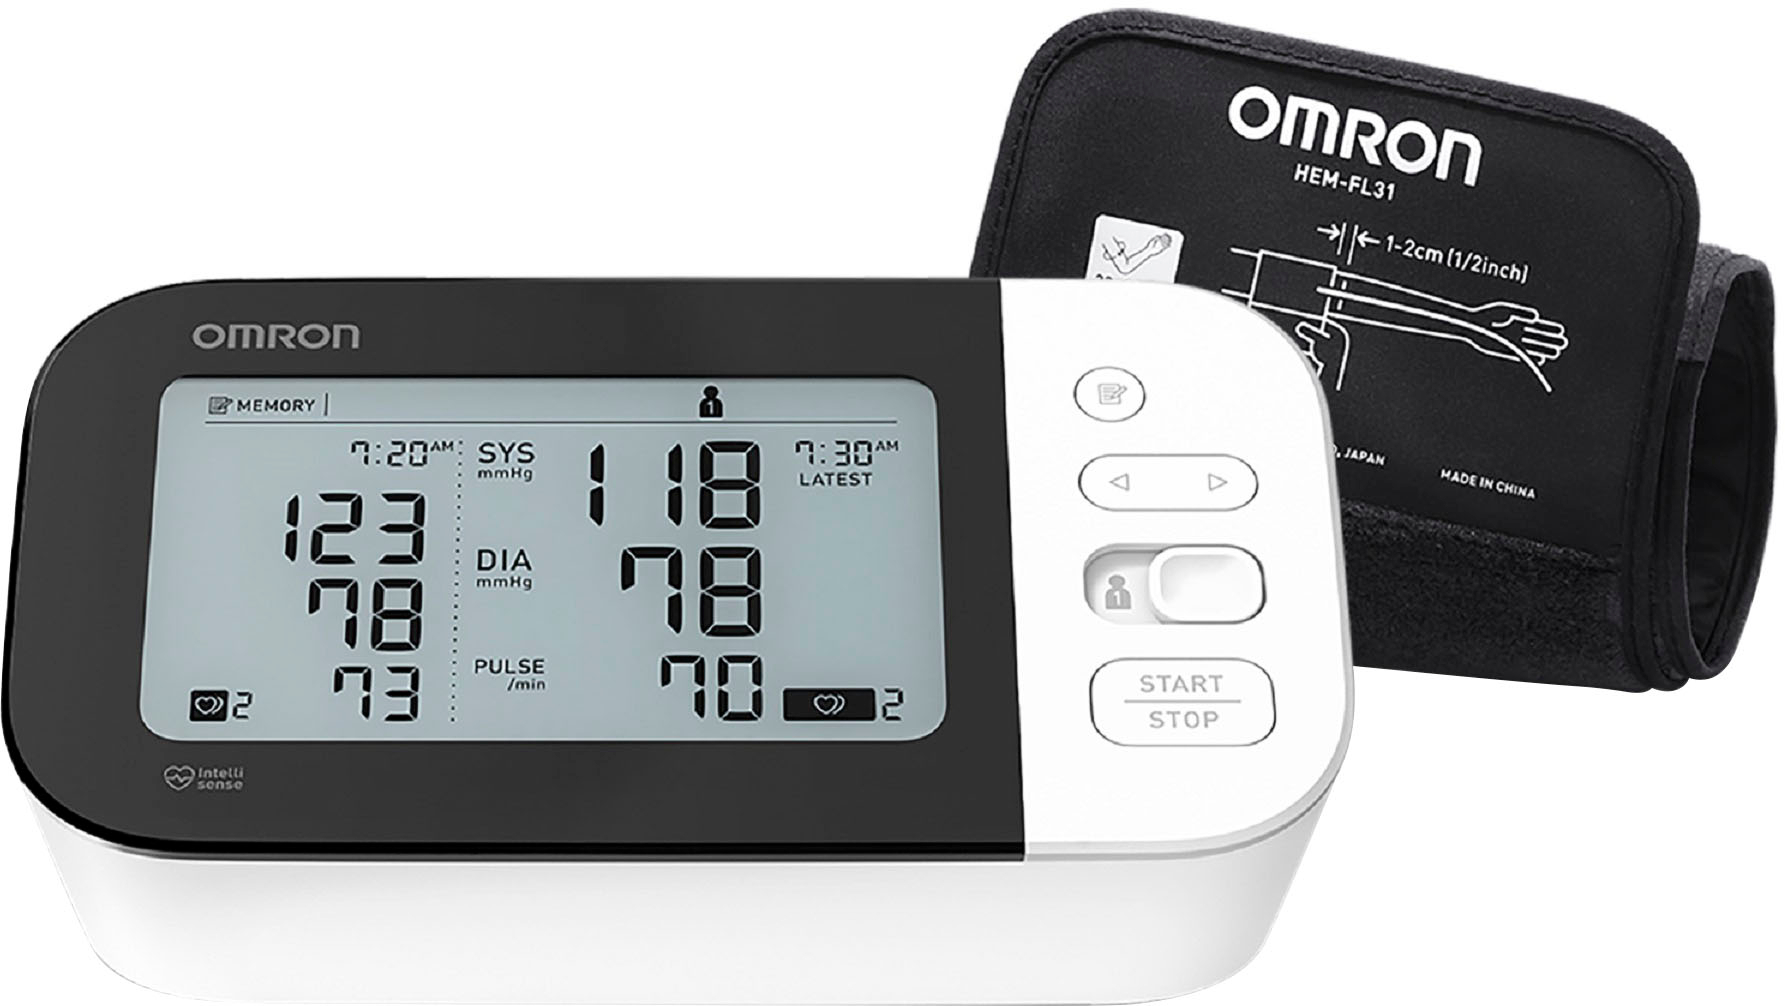  Omron Complete Wireless Upper Arm Blood Pressure